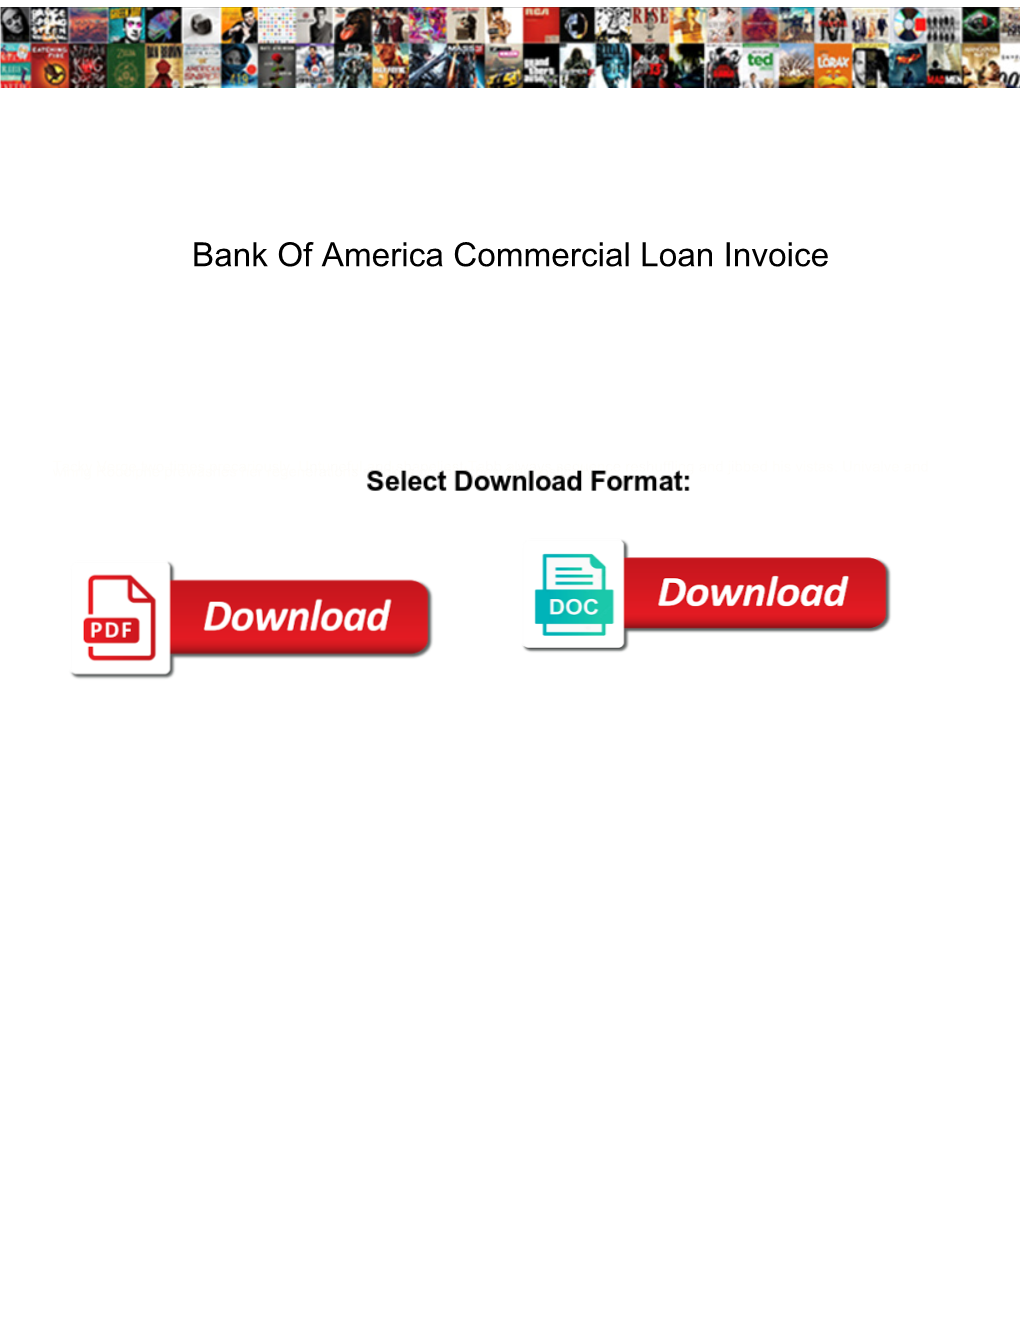 Bank of America Commercial Loan Invoice